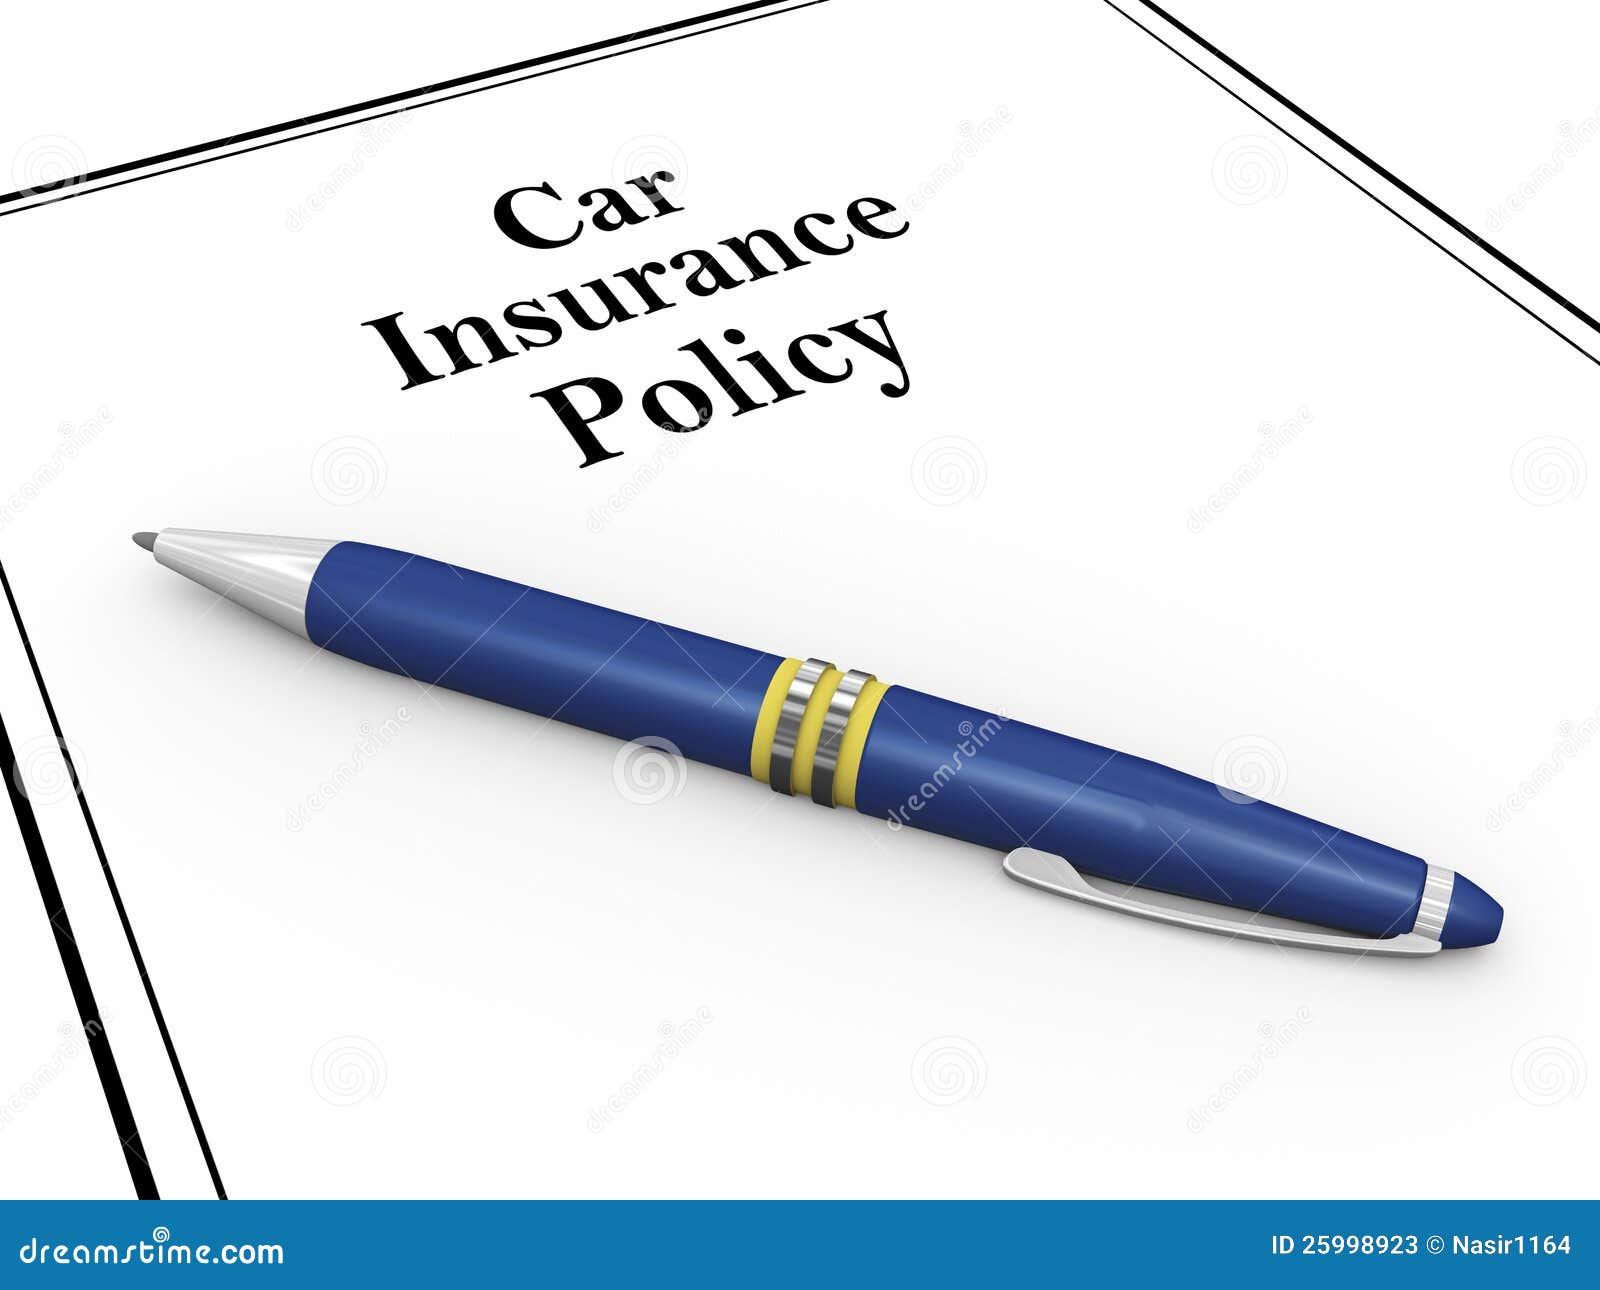 3d Pen And Car Insurance Policy Stock Photos  Image: 25998923